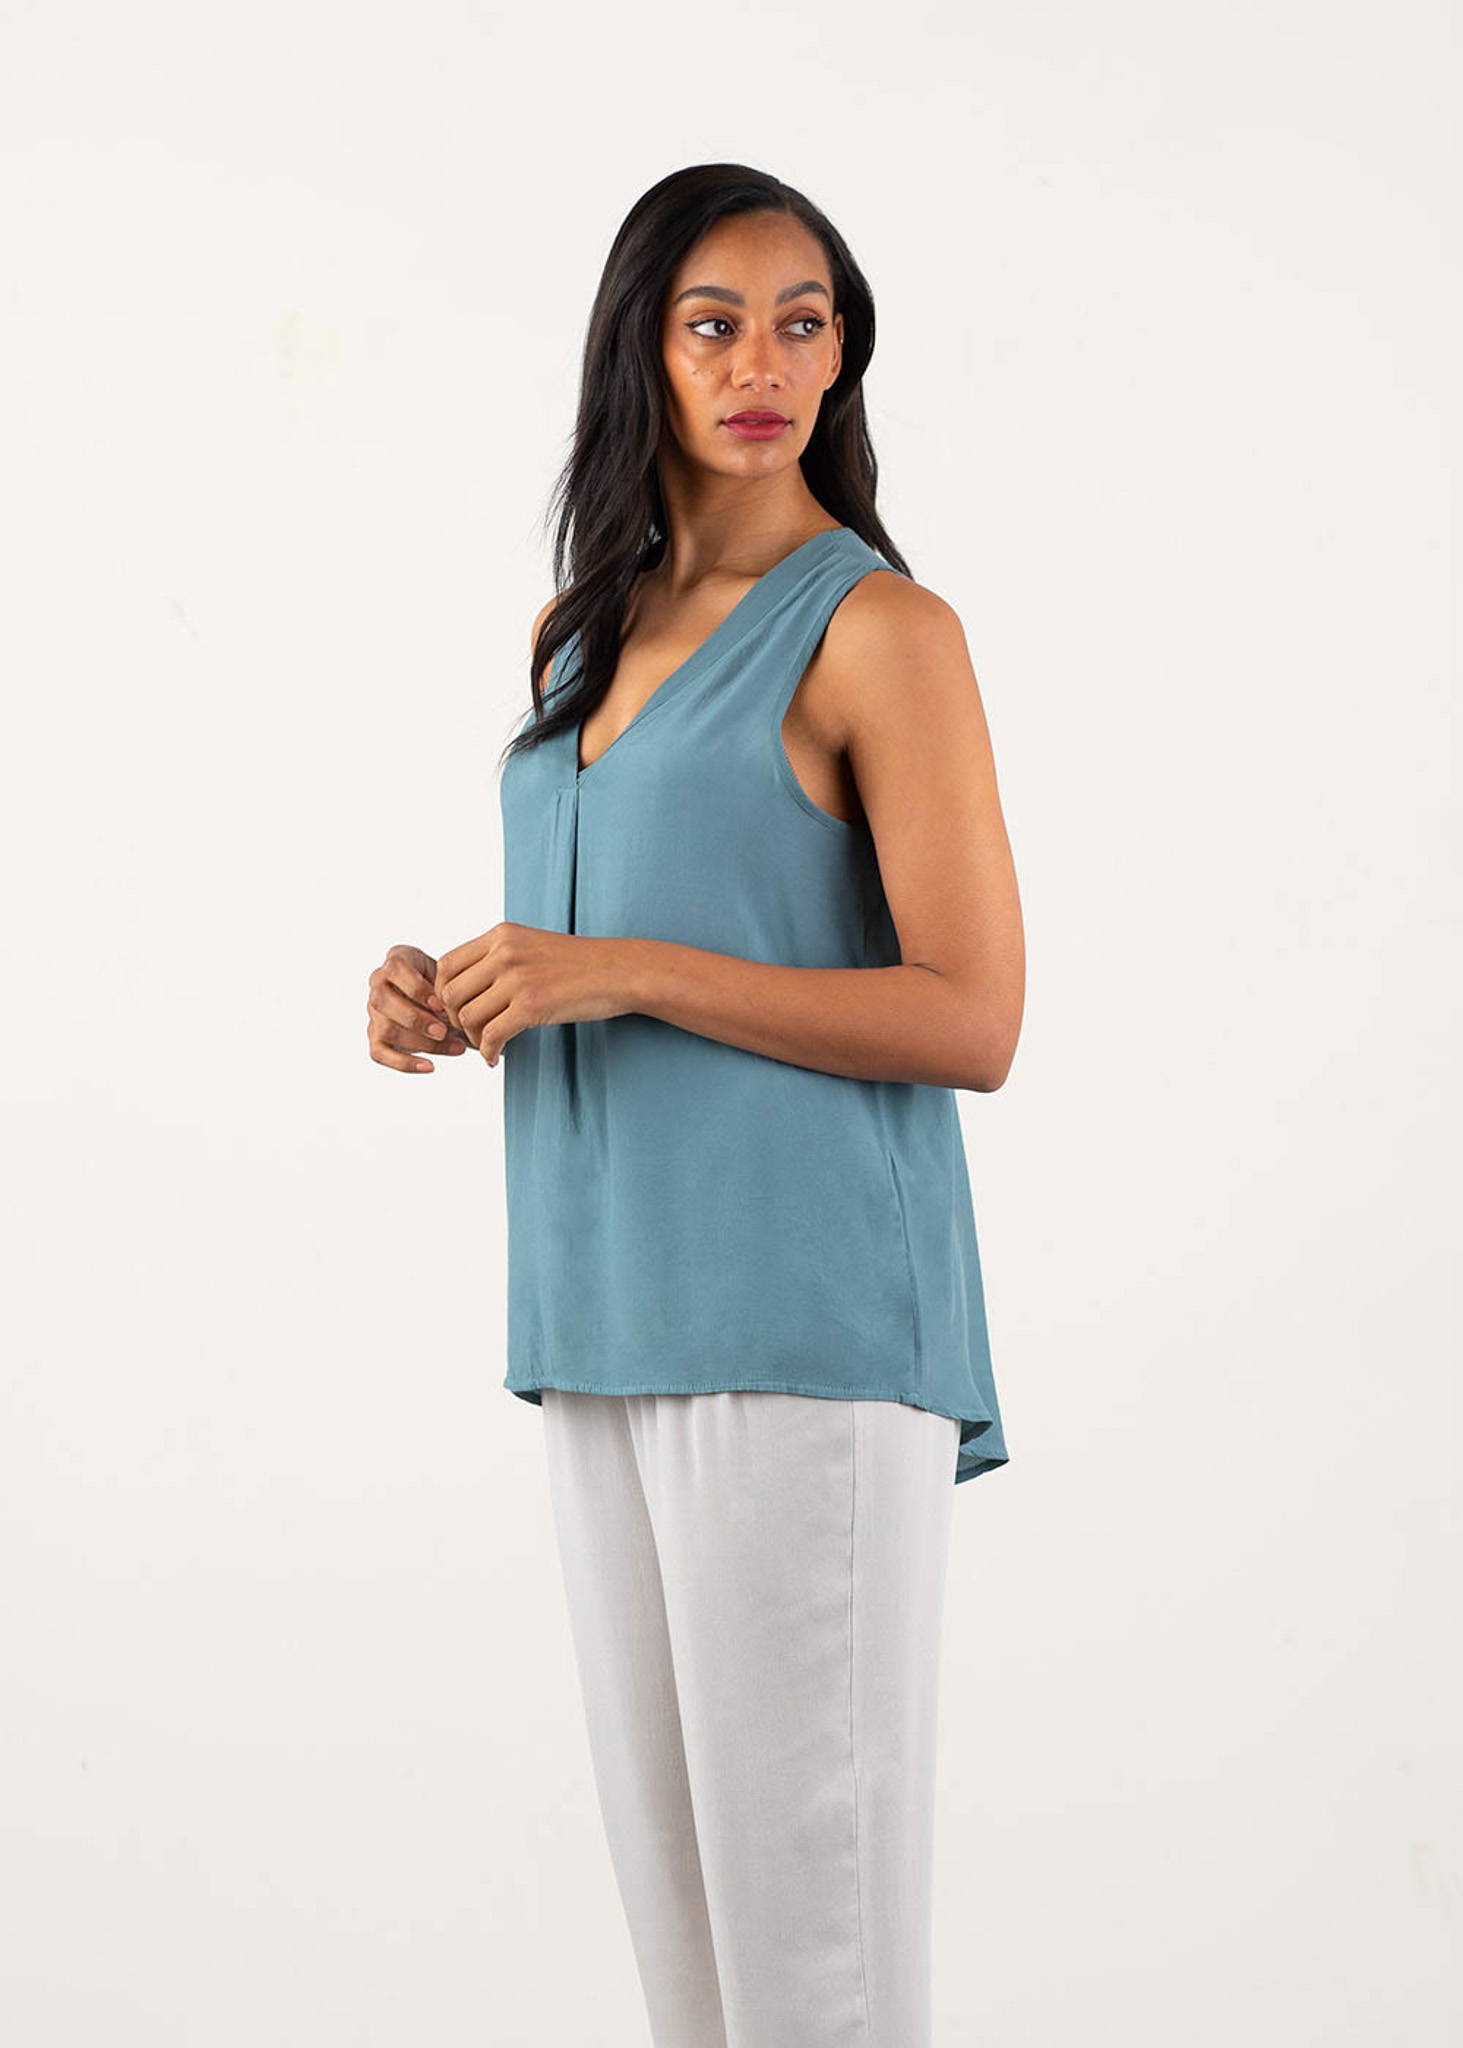 A model wearing a blue grey v-neck, sleeveless top over oatmeal drapey trouser and cream block heels